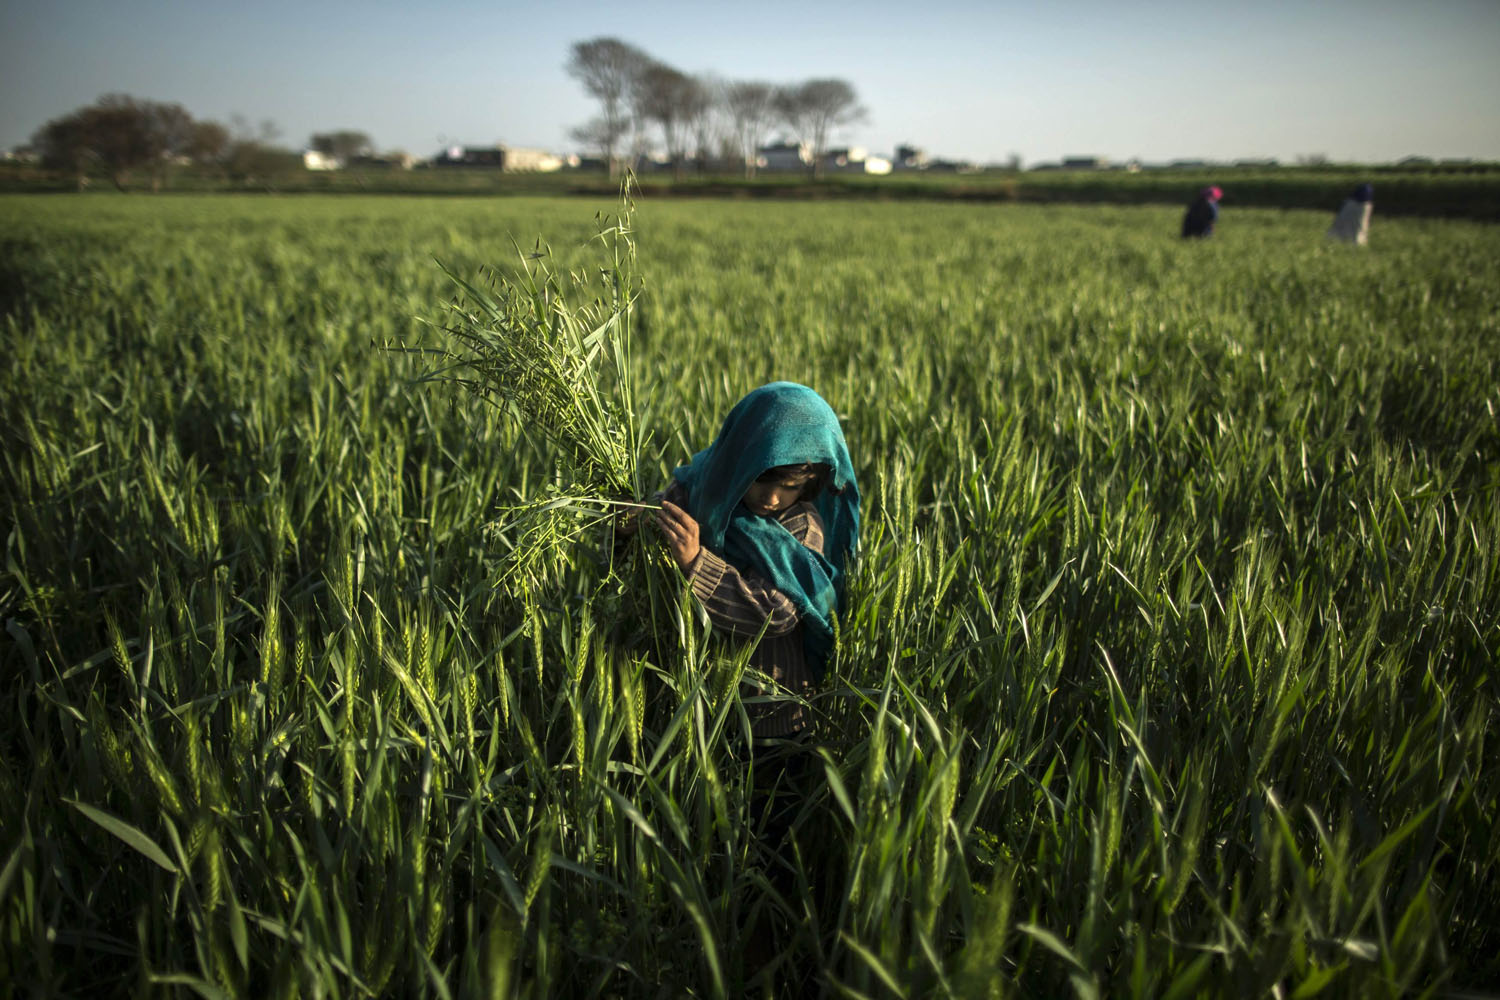 A girl, whose family moved to Islamabad from Khyber Pakhtunkhwa Province, collects grass in Islamabad